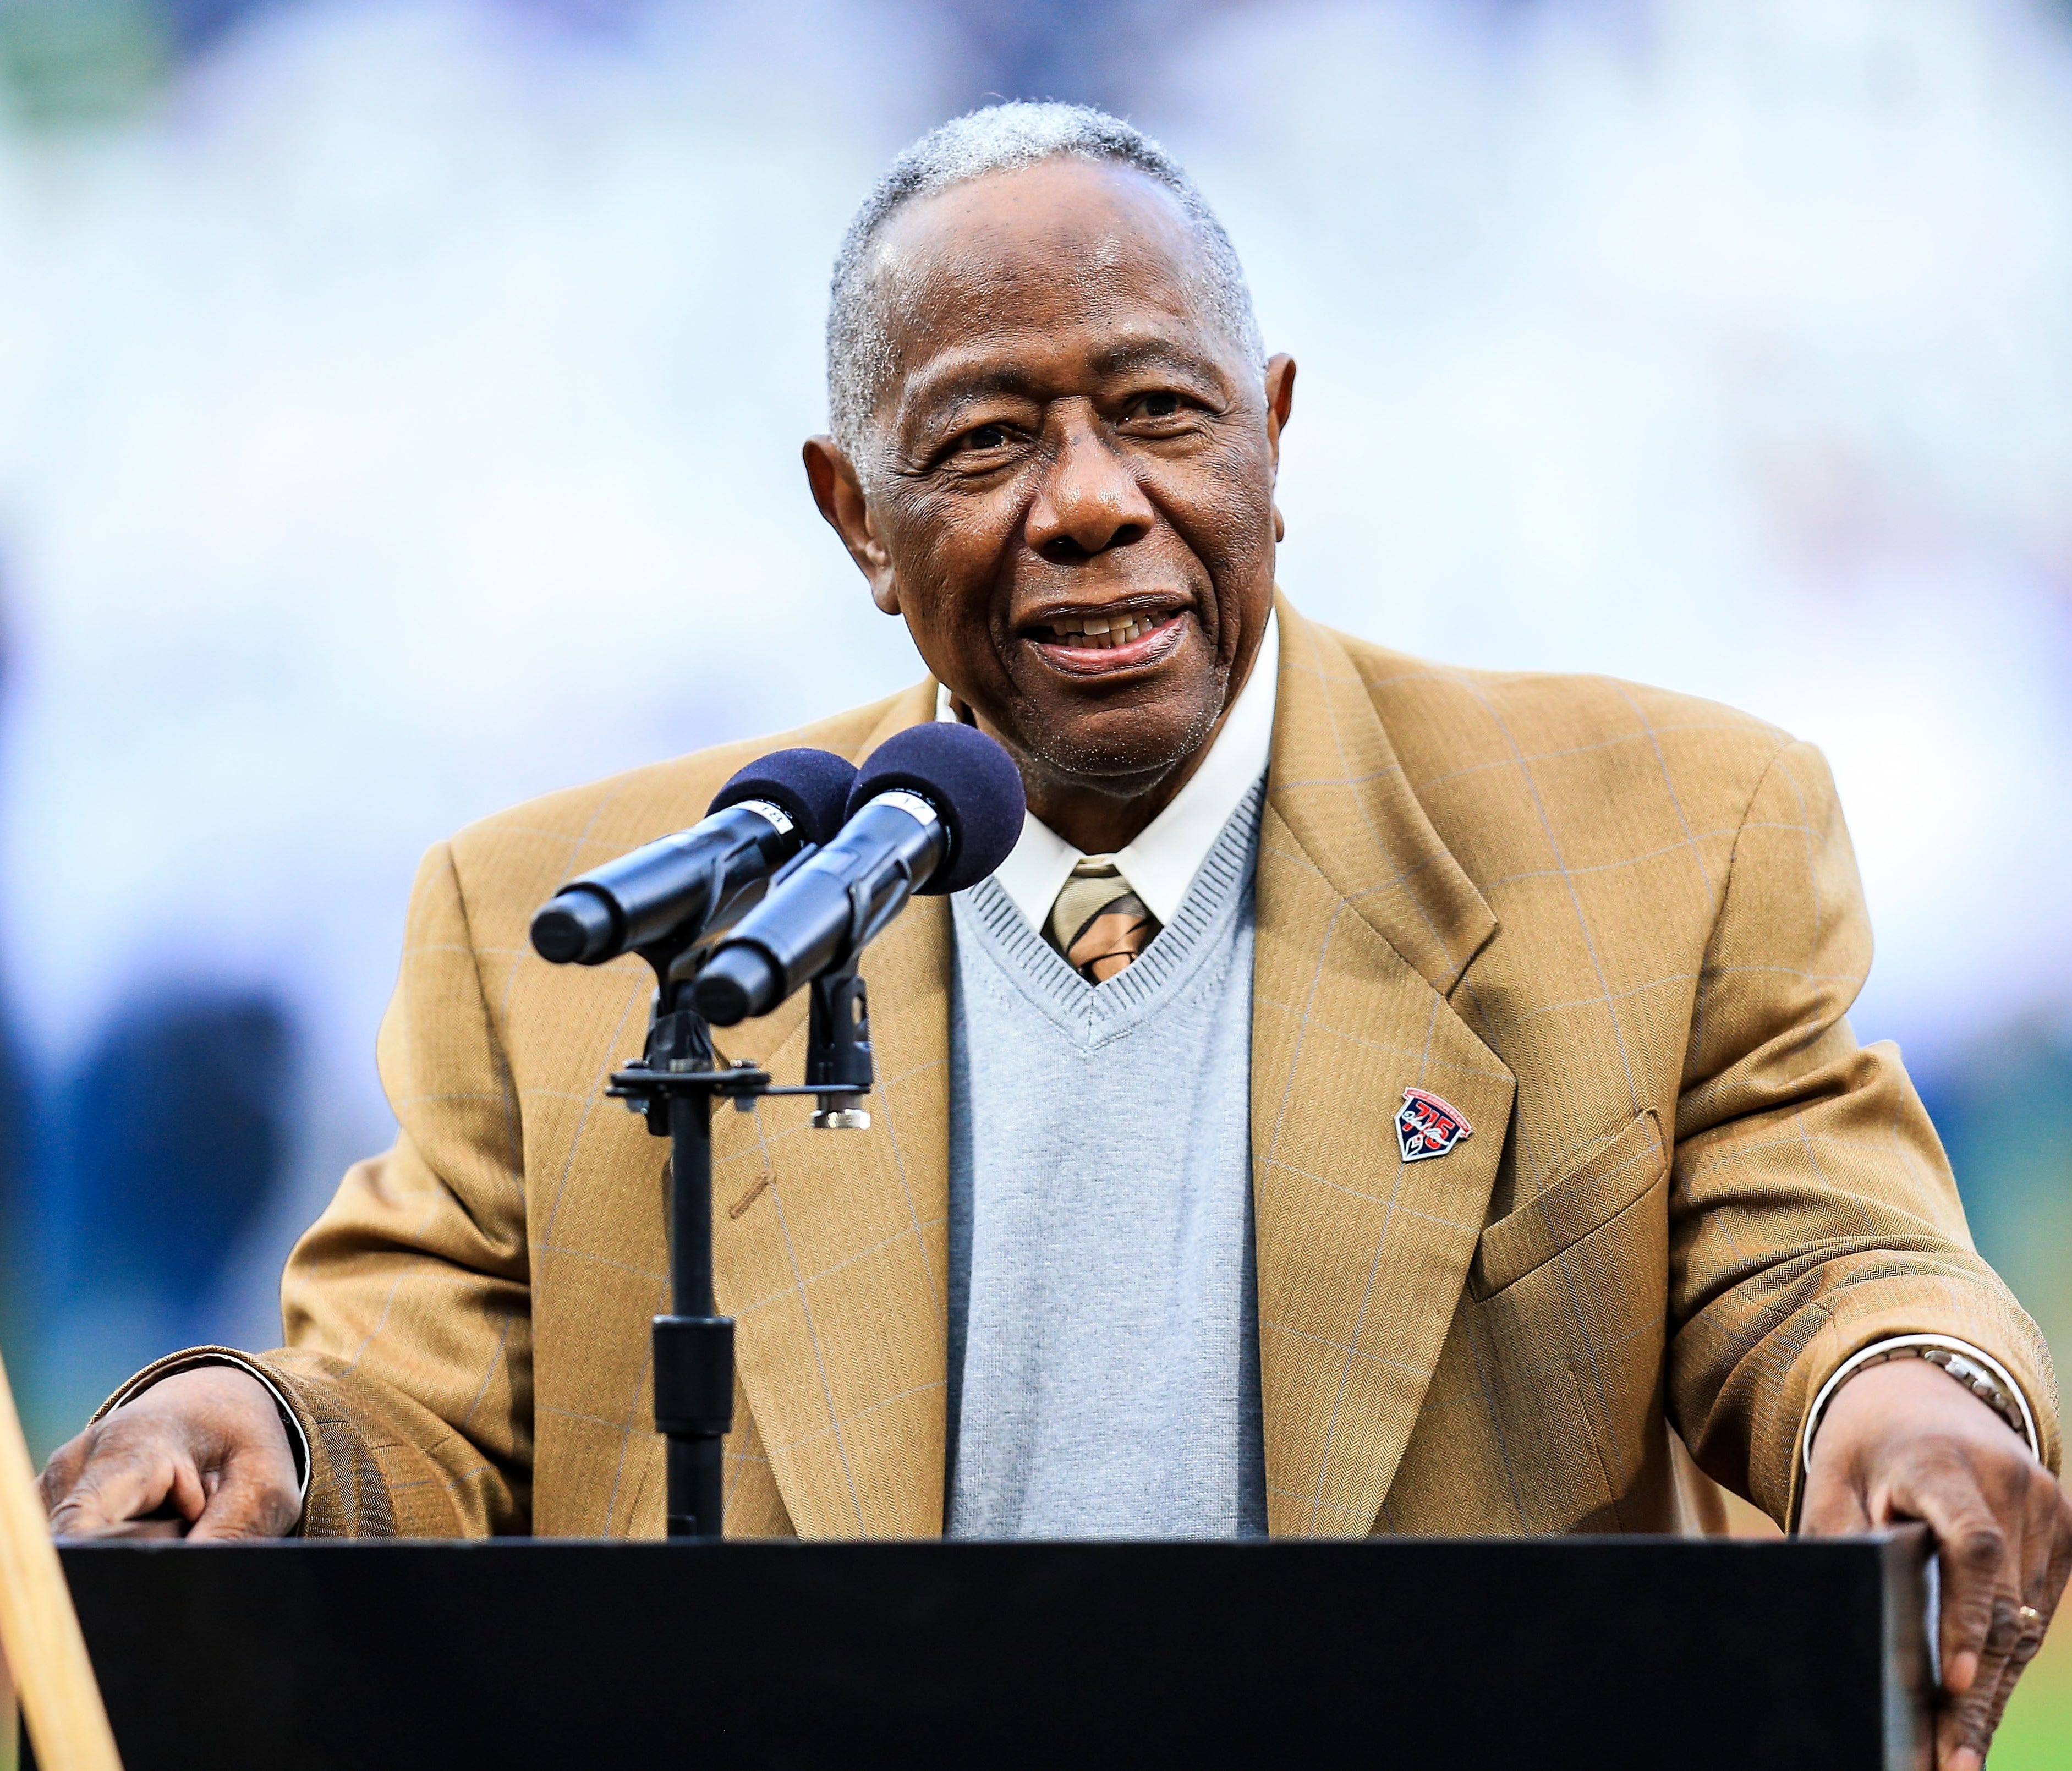 Former Braves slugger Hank Aaron speaks during a 2014 ceremony at Turner Field in Atlanta honoring the 40th anniversary of his record-breaking 715th home run.